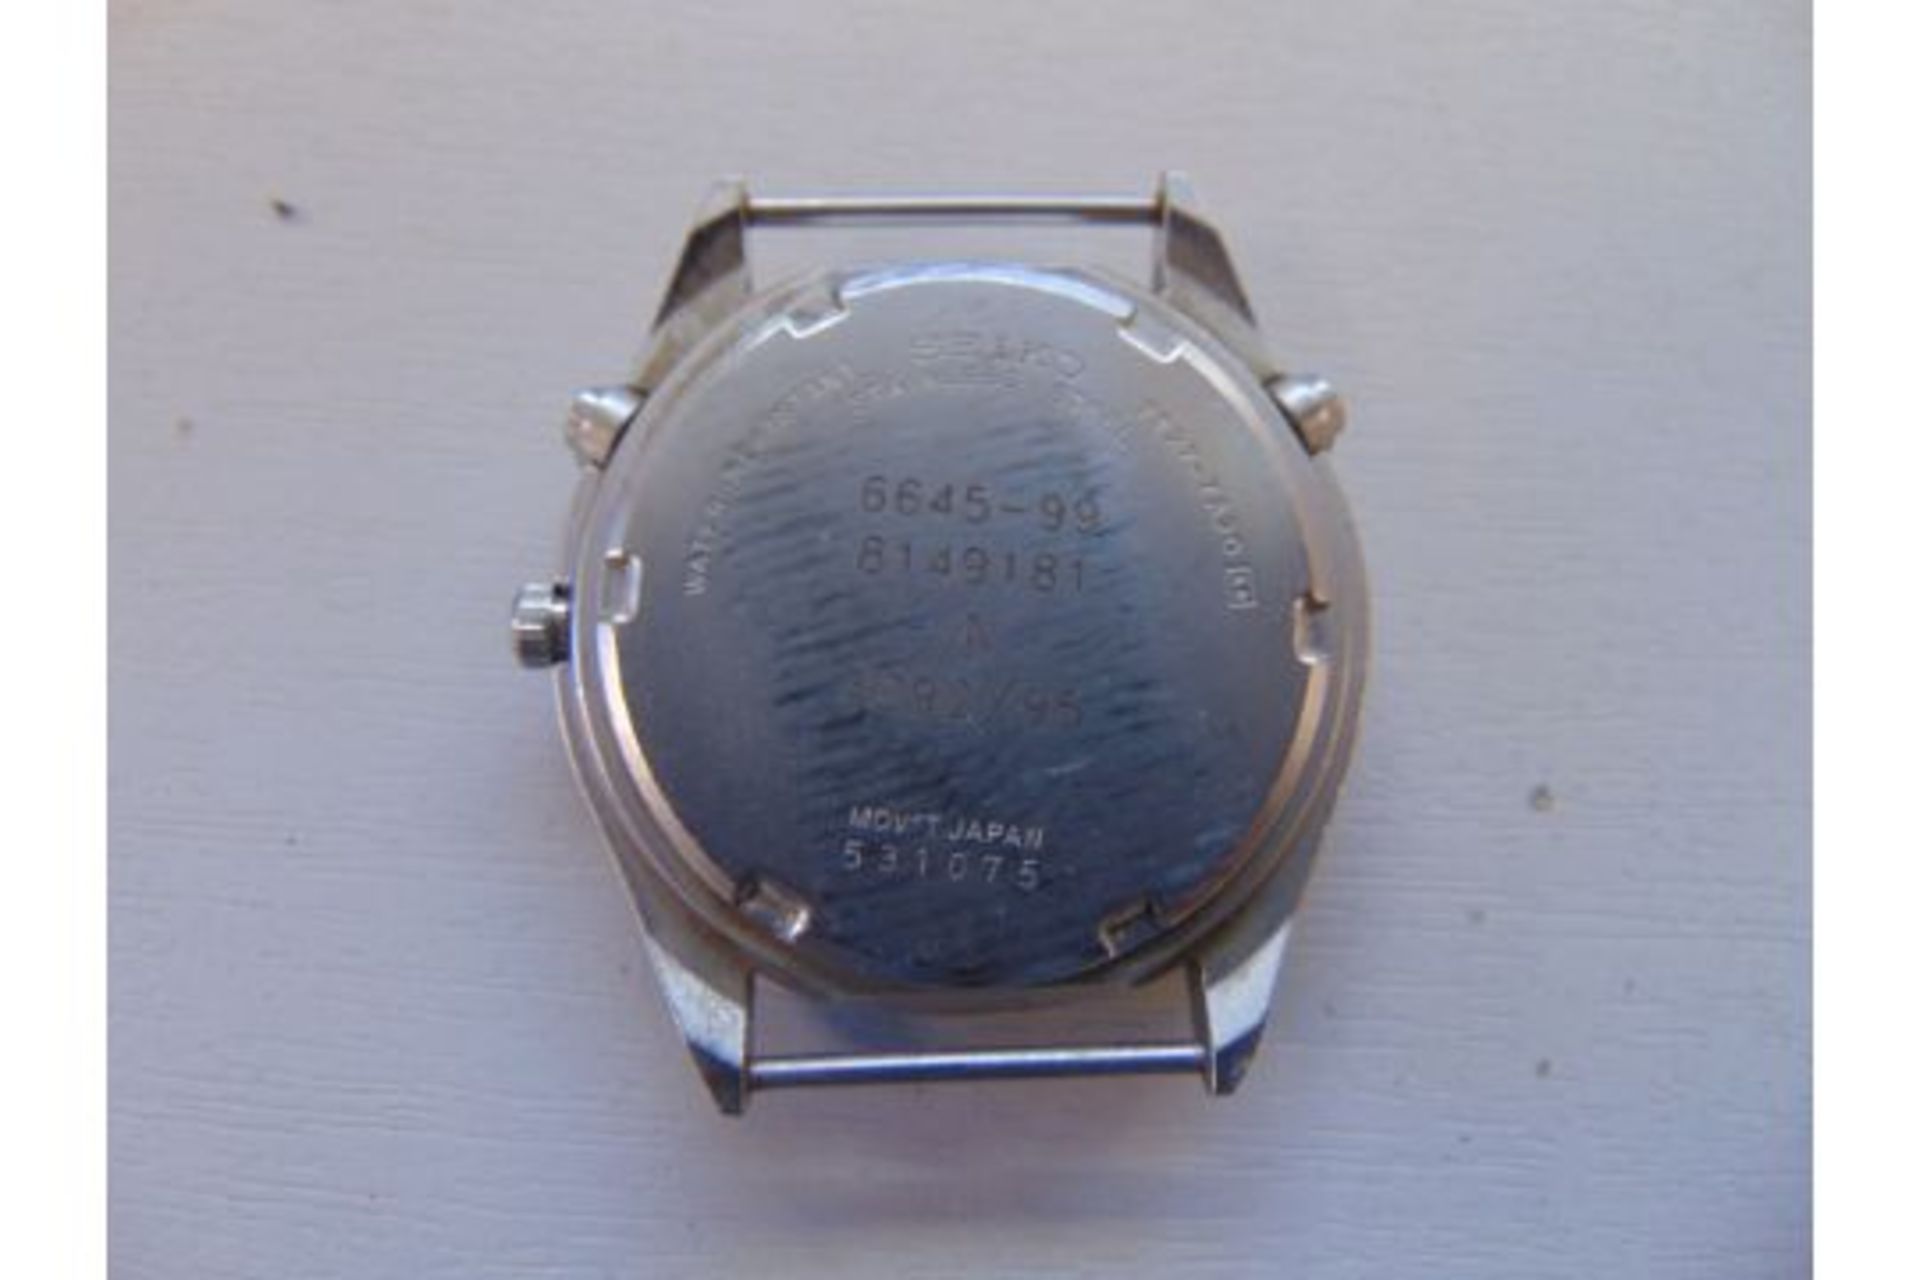 Seiko Gen 2 Pilots Chrono (Date adjust) RAF Tornado Force Issue, Nato Numbers, Date 1995, S/N 3092 - Image 5 of 5